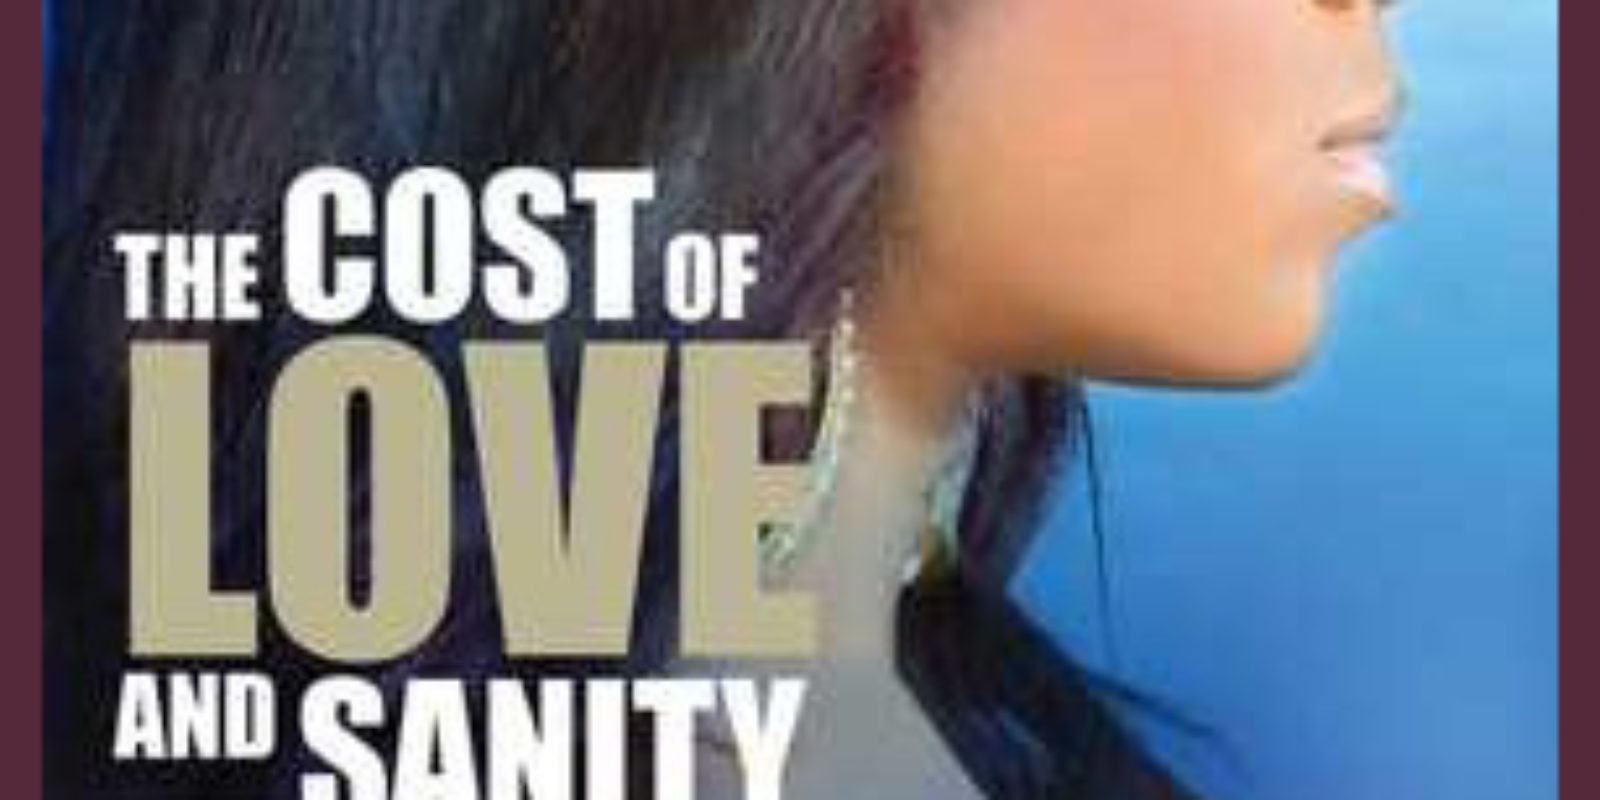 The cost of Love and Sanityb